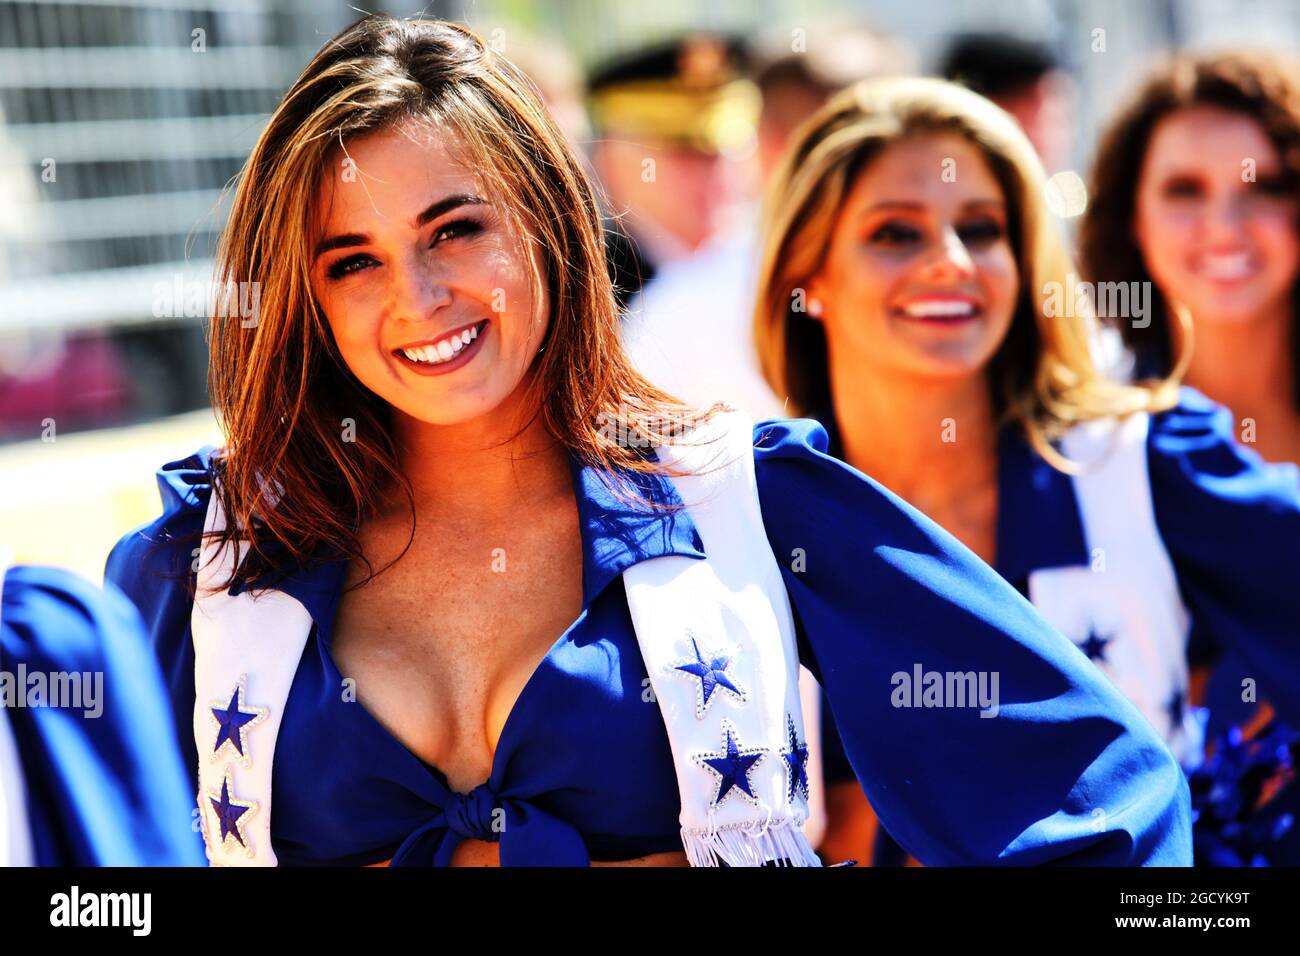 Dallas Cowboys Cheerleaders on the grid. United States Grand Prix, Sunday 21st October 2018. Circuit of the Americas, Austin, Texas, USA. Stock Photo